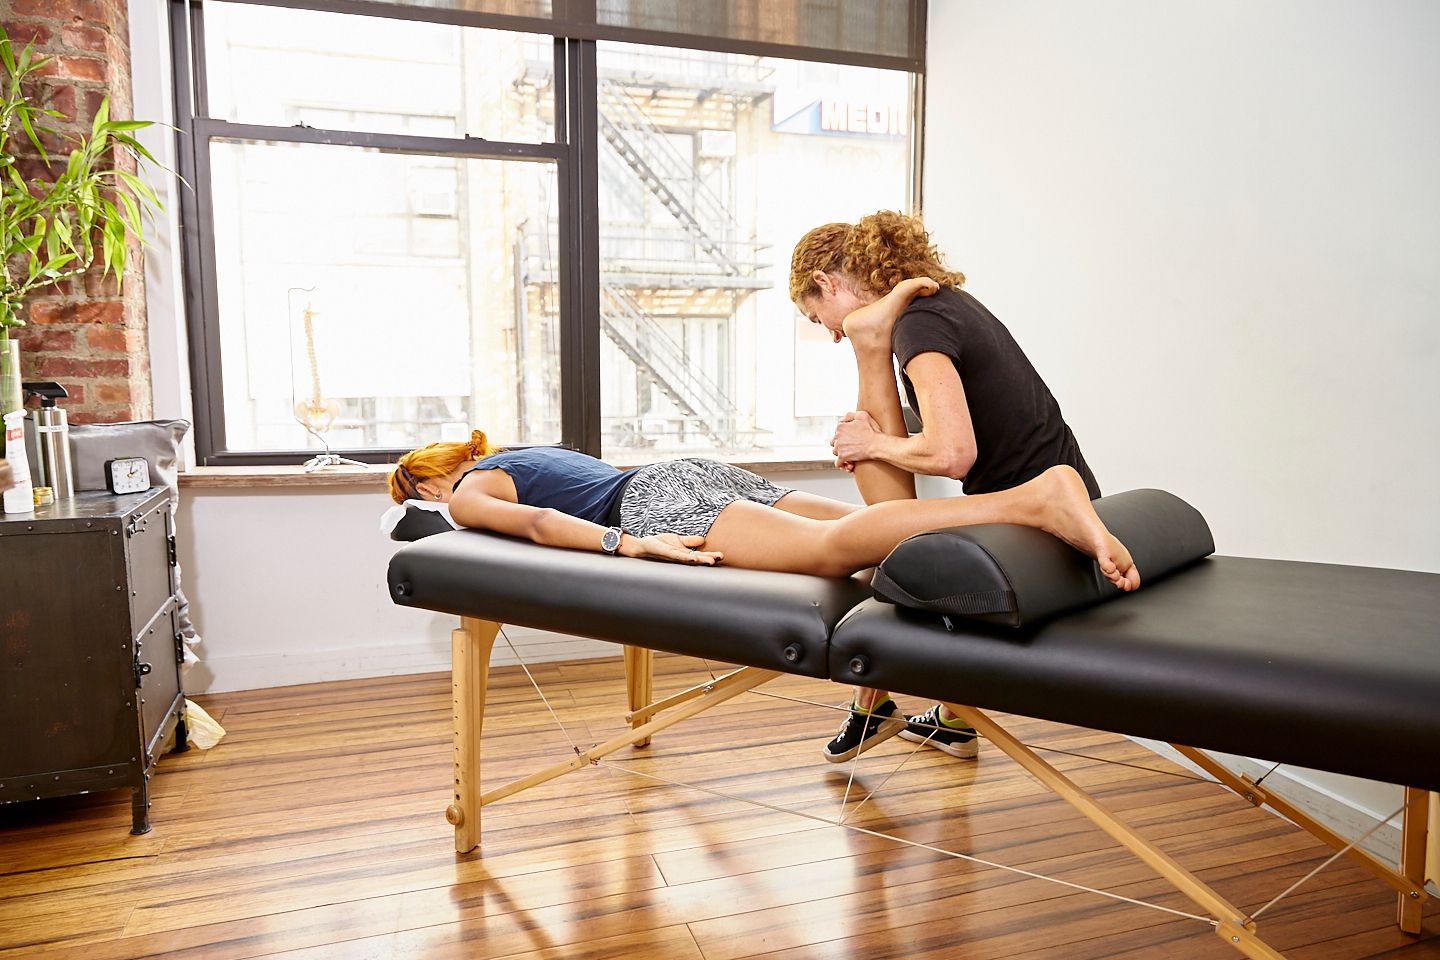 Amy Montia, PhD, LMT performing medical massage therapy for sciatic nerve pain relief at Physio Logic NYC in Brooklyn, NY.